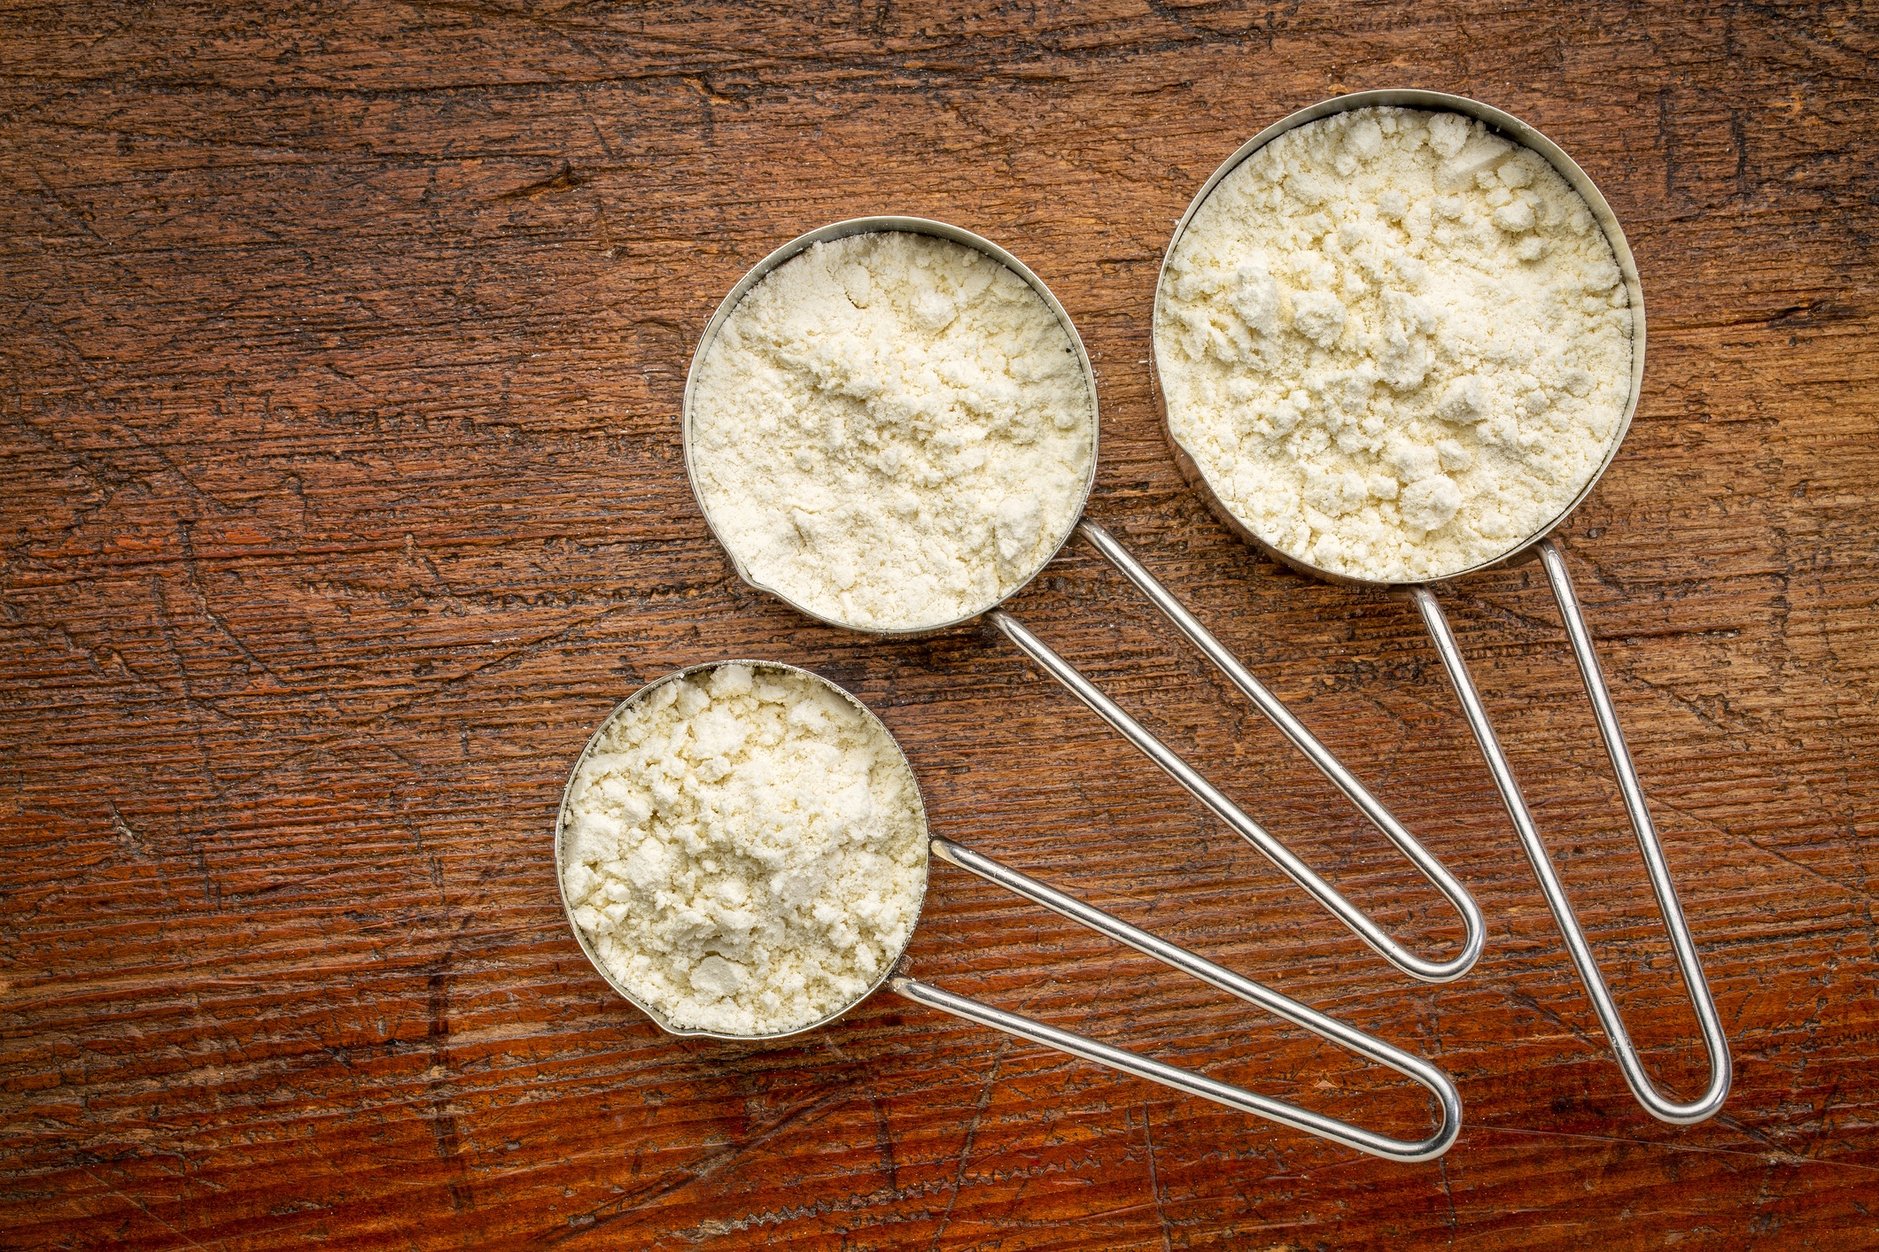 Is Whey Protein Concentrate a Natural Ingredient?